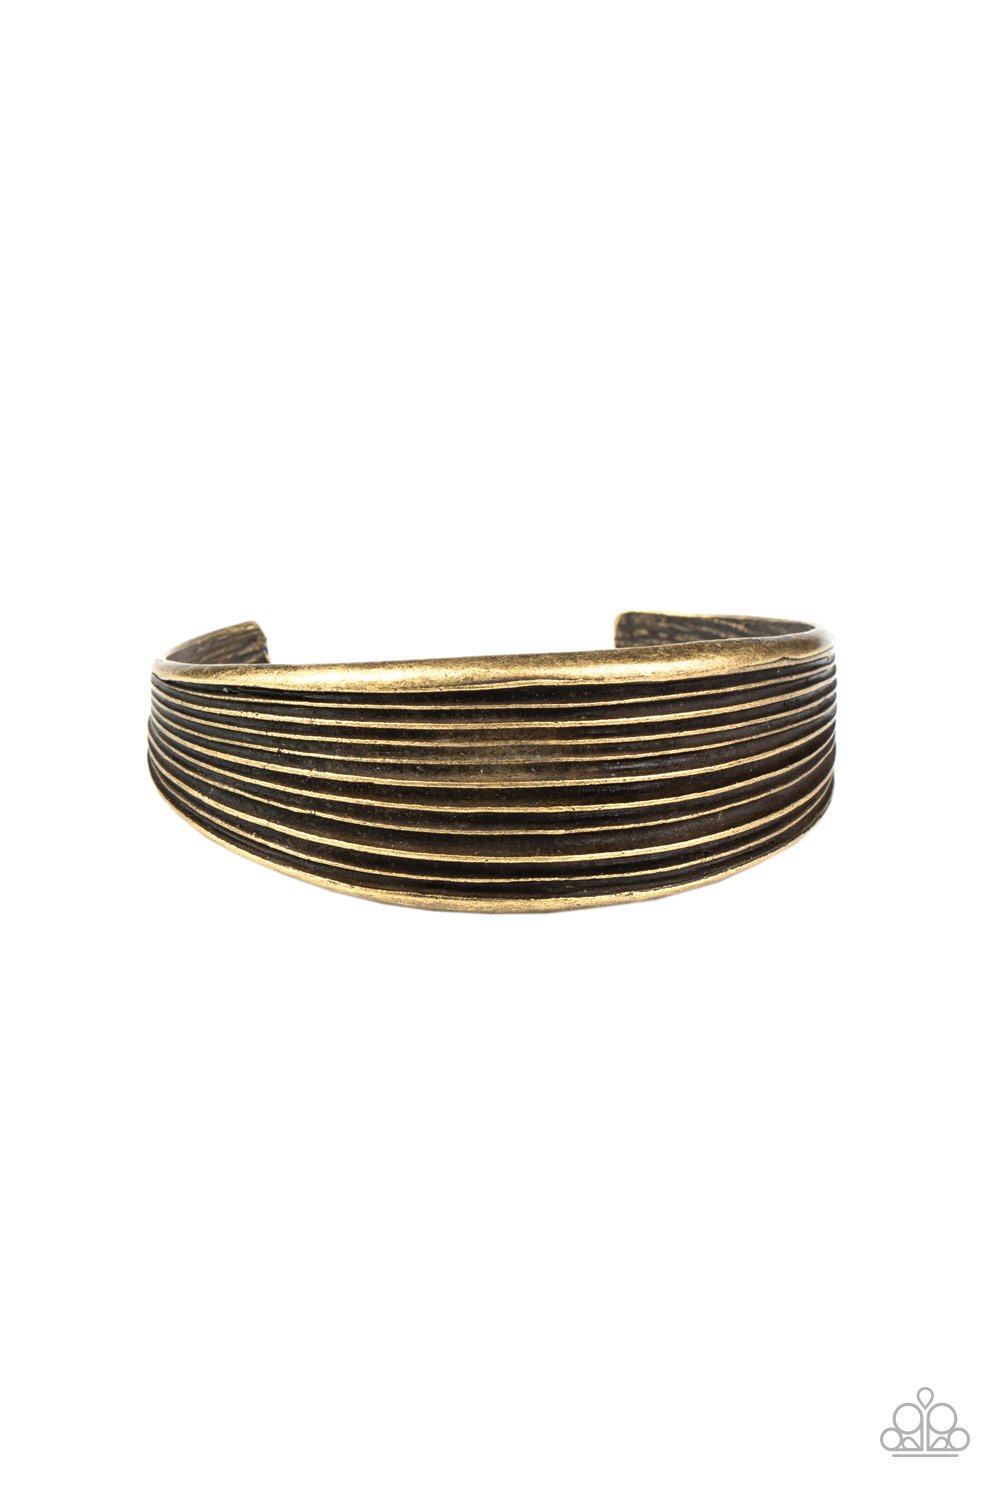 . Off The Cuff Couture - Brass Bracelet